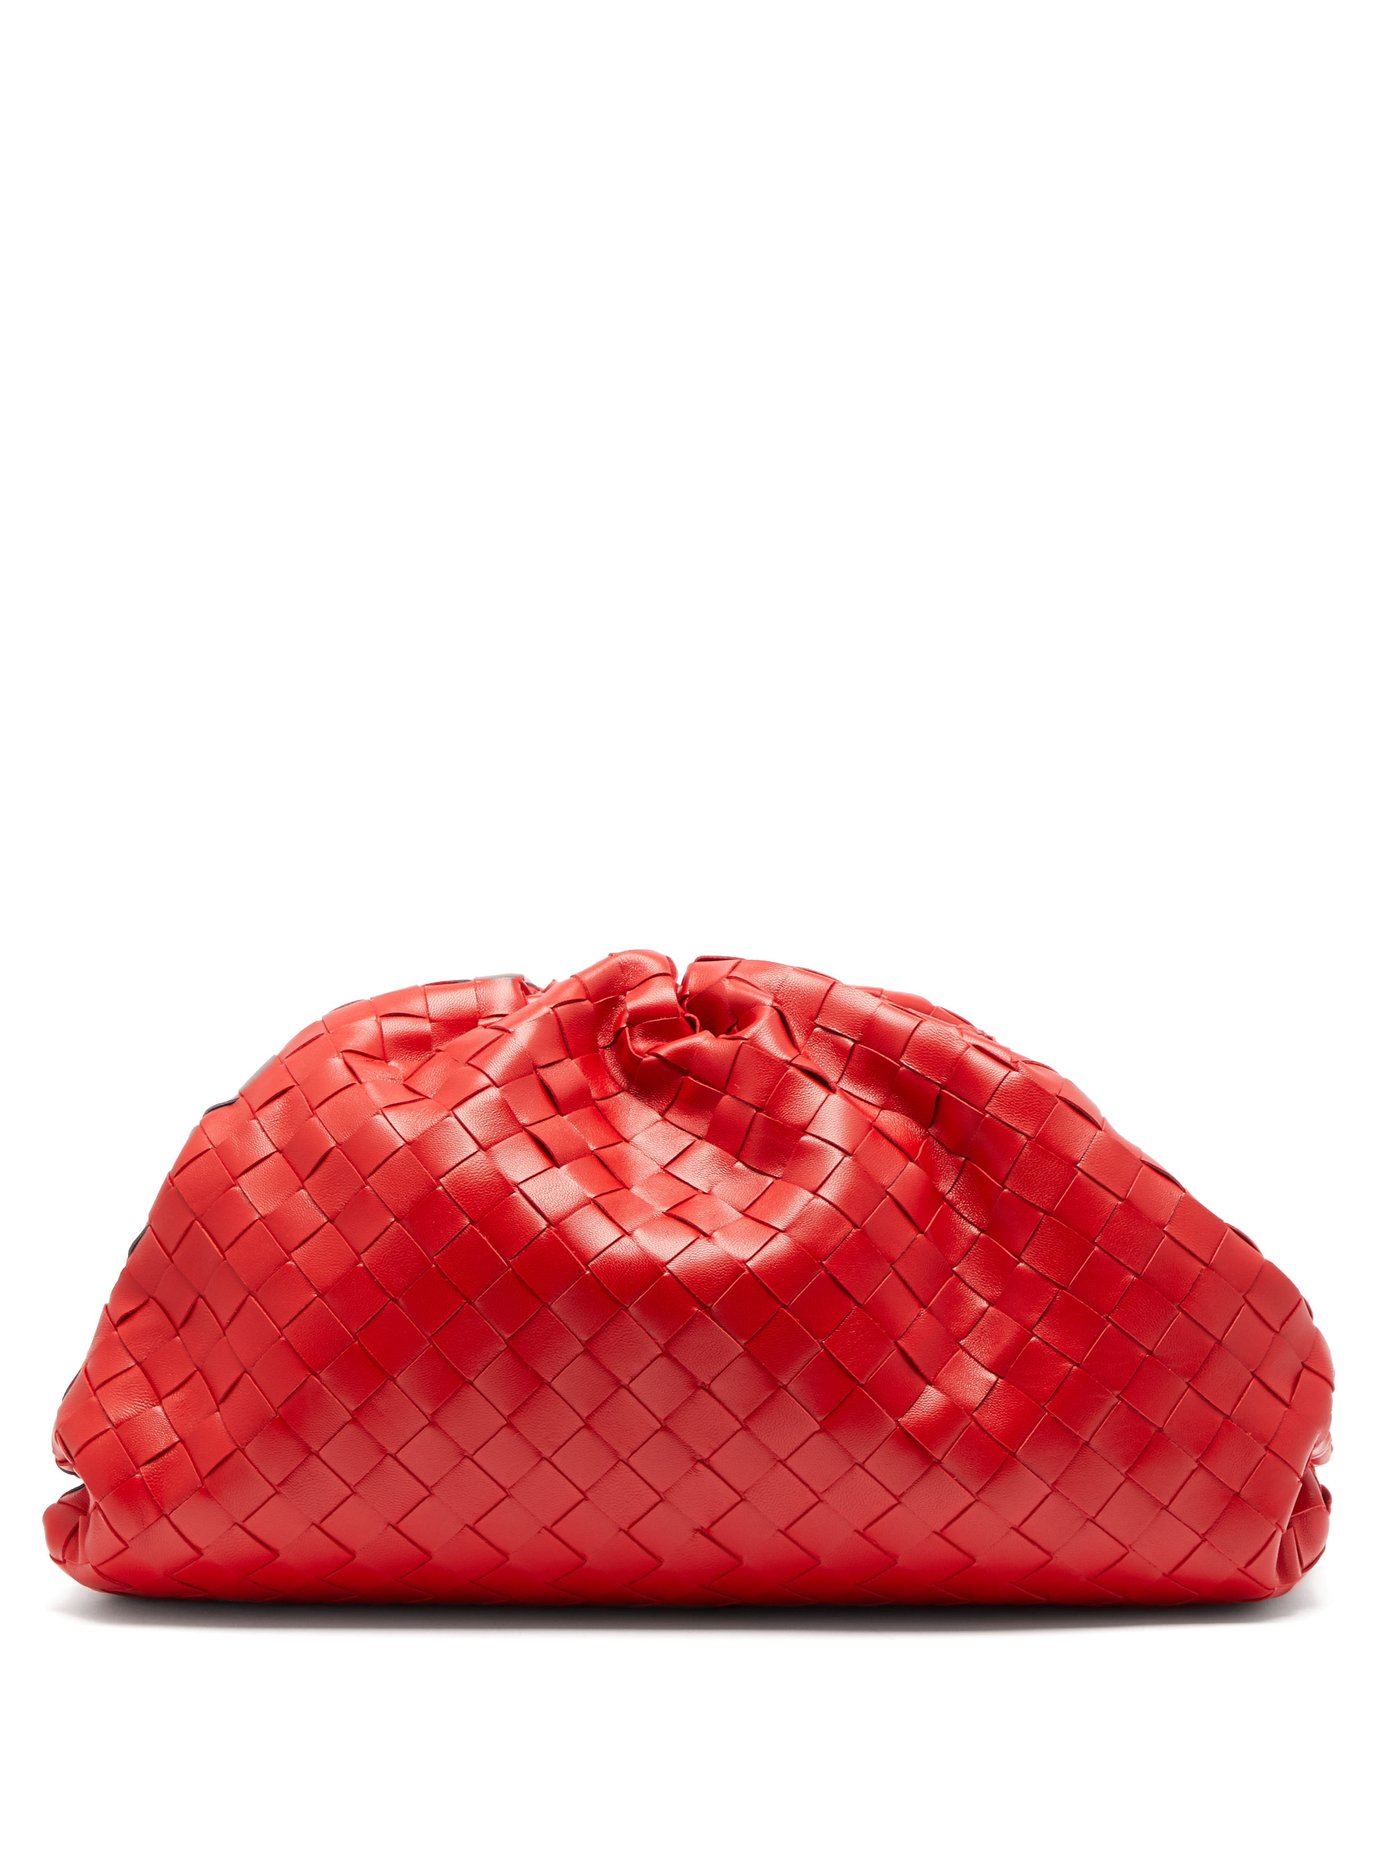 large red clutch bag